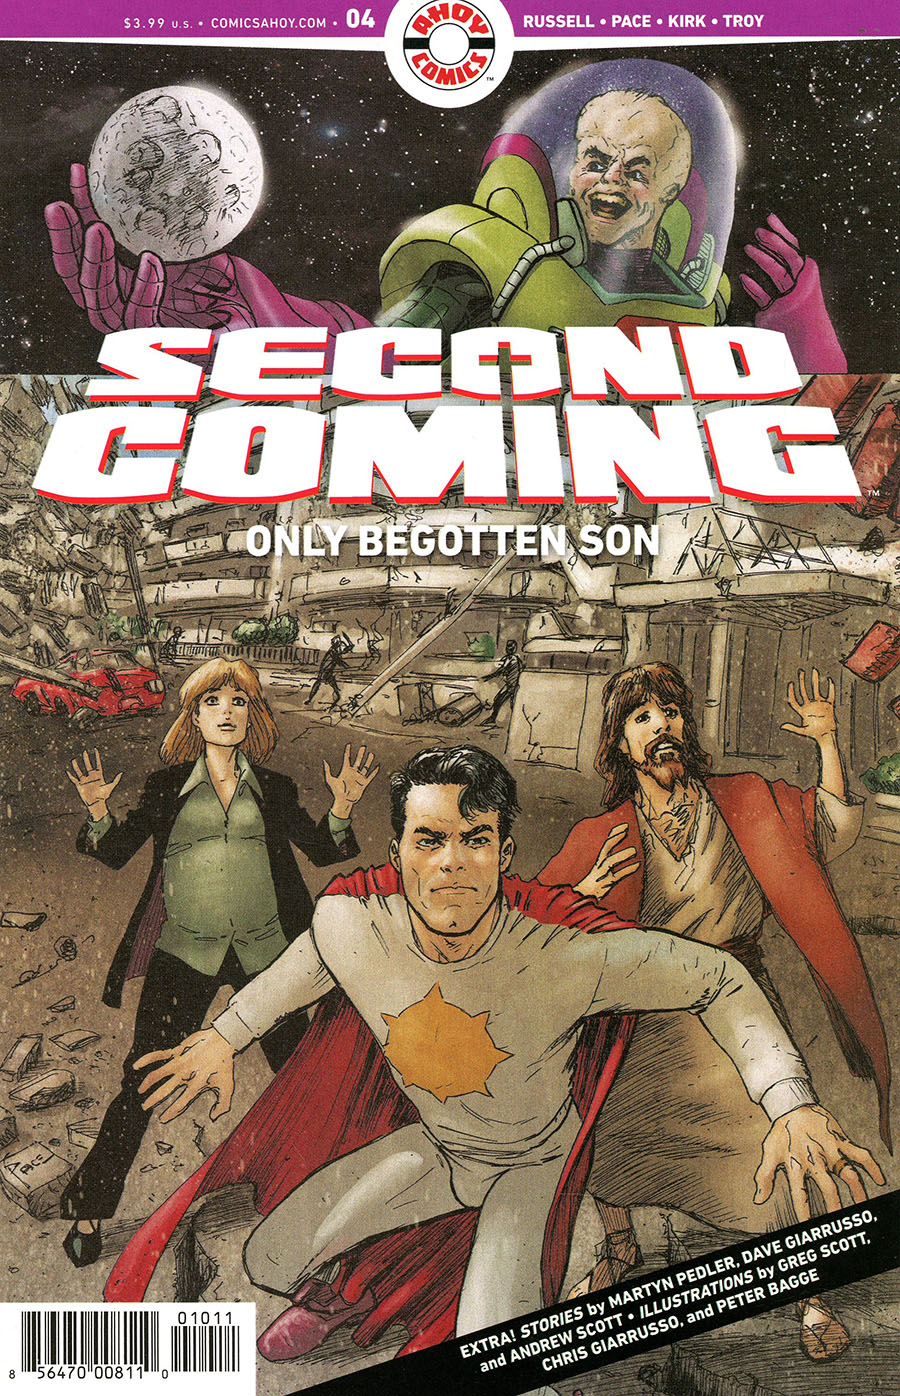 Second Coming Only Begotten Son #4